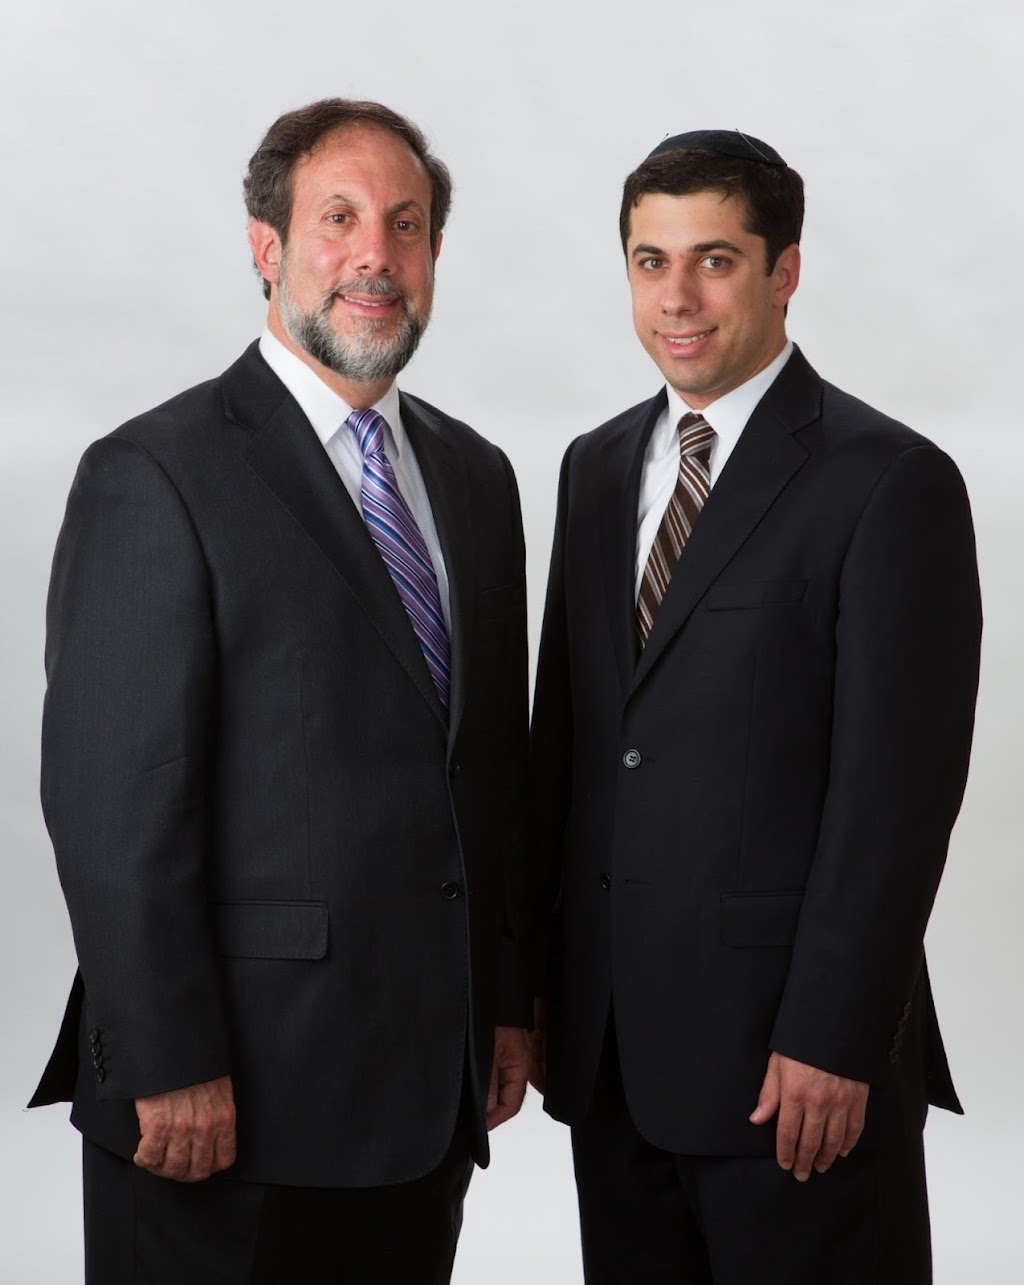 Ely J. Rosenzveig & Associates, P.C. | 570 Taxter Rd Suite 520, Elmsford, NY 10523 | Phone: (914) 816-2900